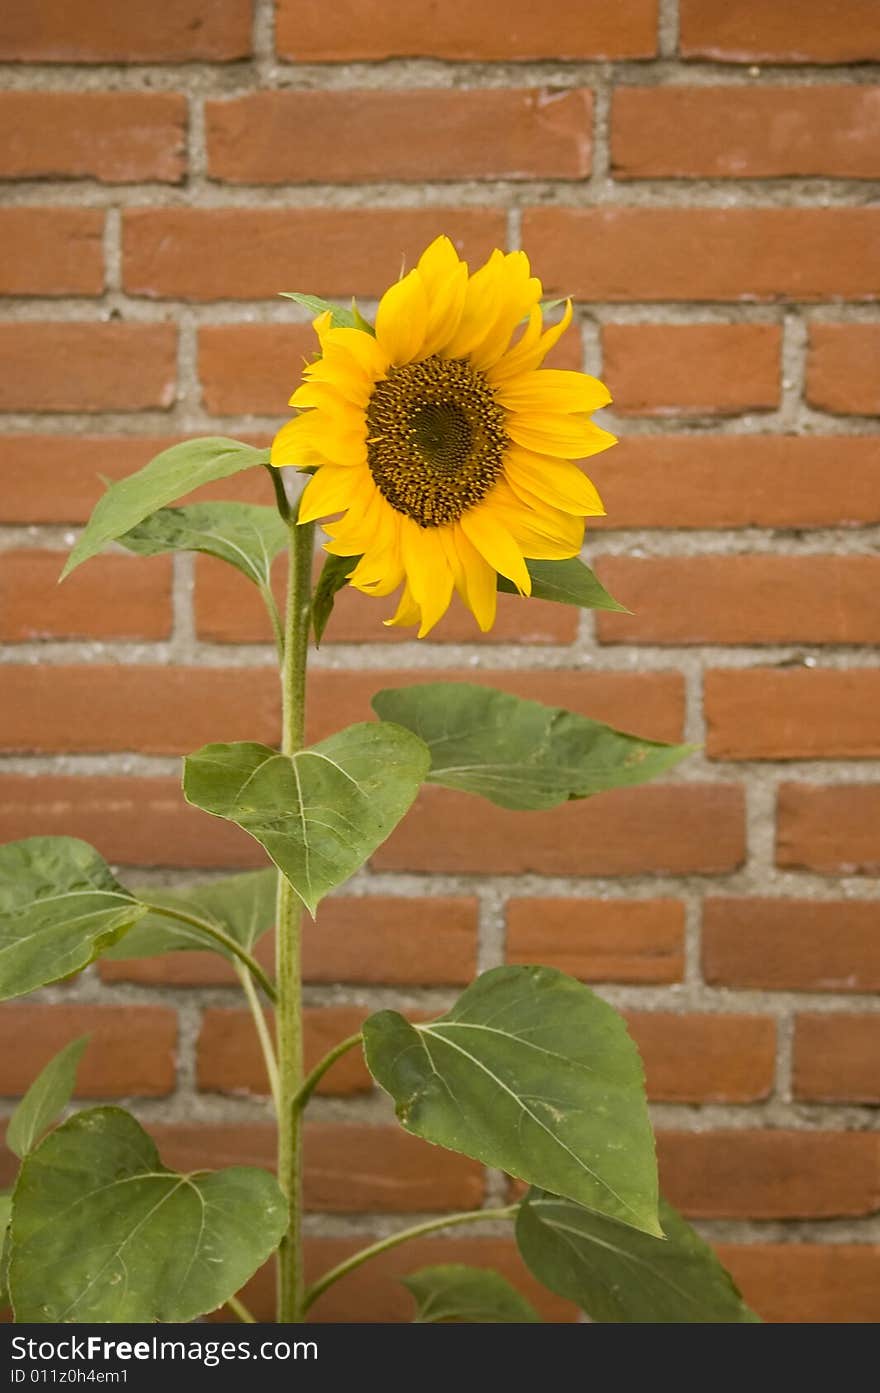 Single sunflower with red brick wall background